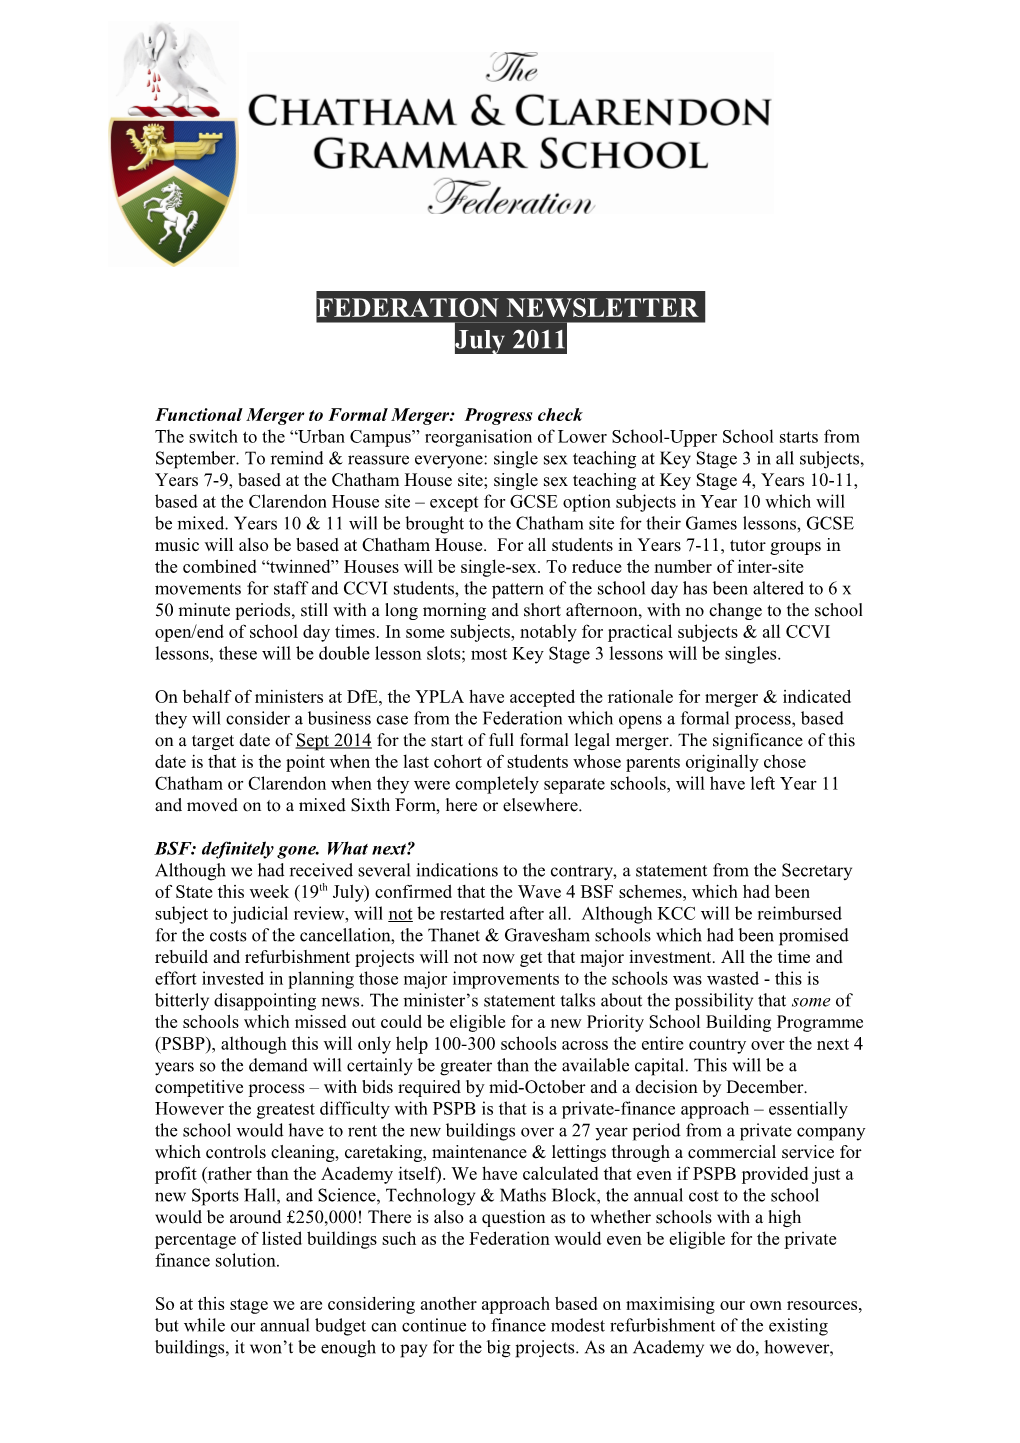 Items for Federation Newsletter (May 2011)